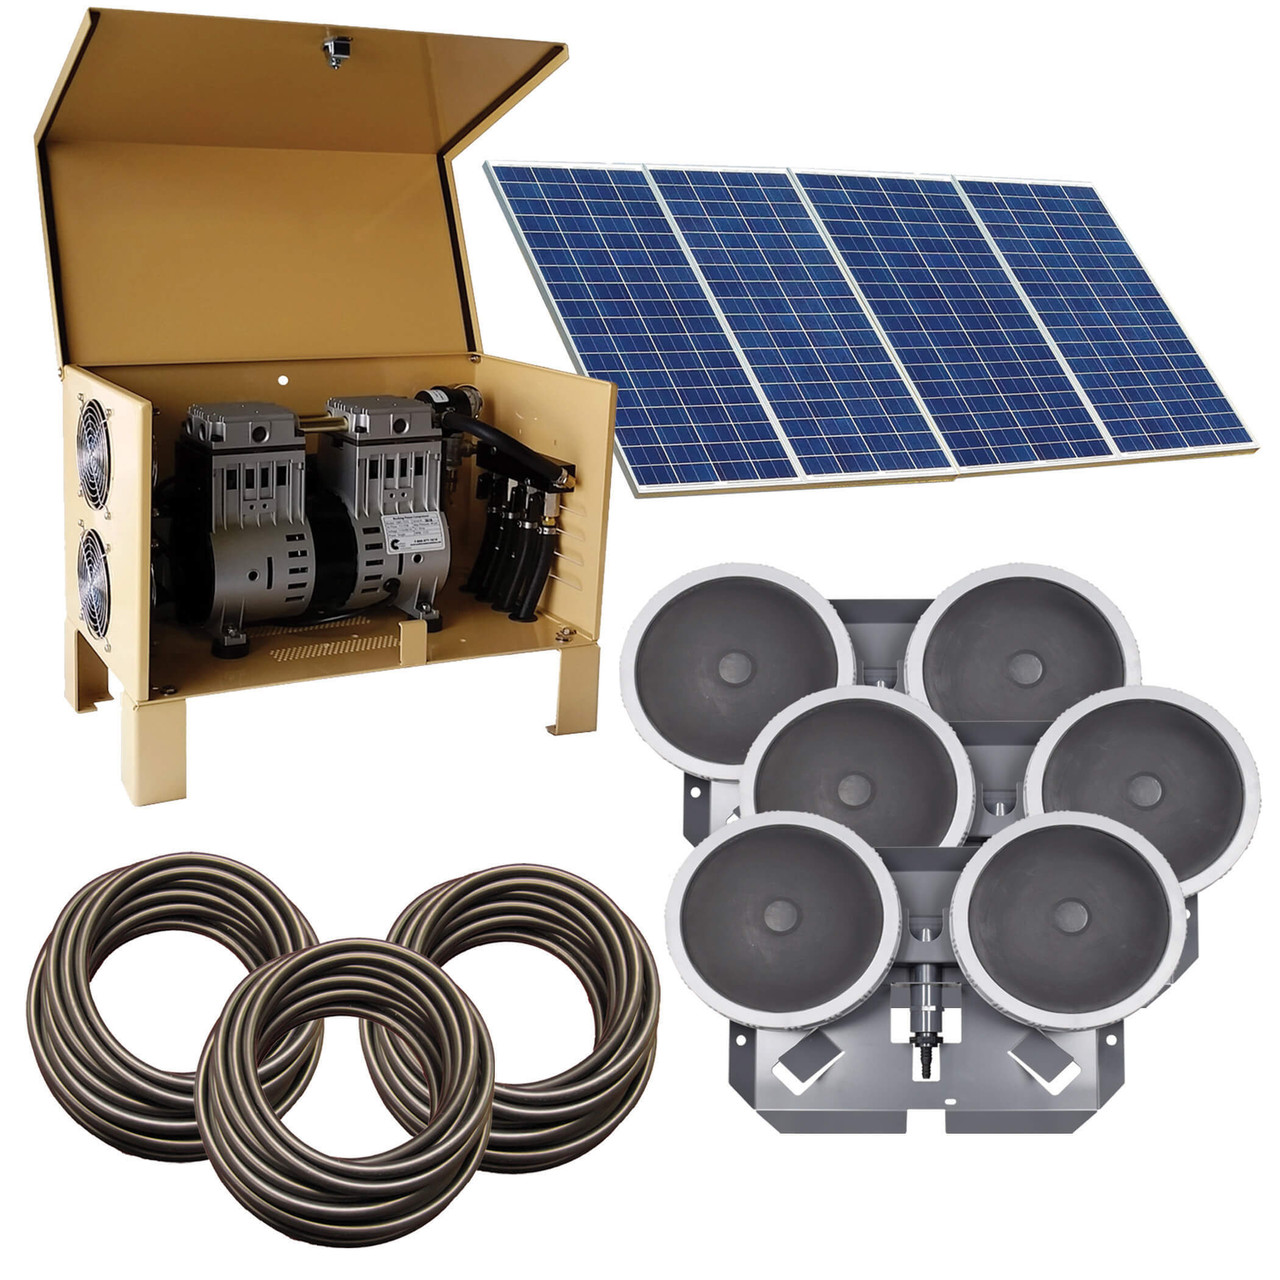 EasyPro Deep Water Solar Aeration Deluxe Systems - FREE SHIPPING